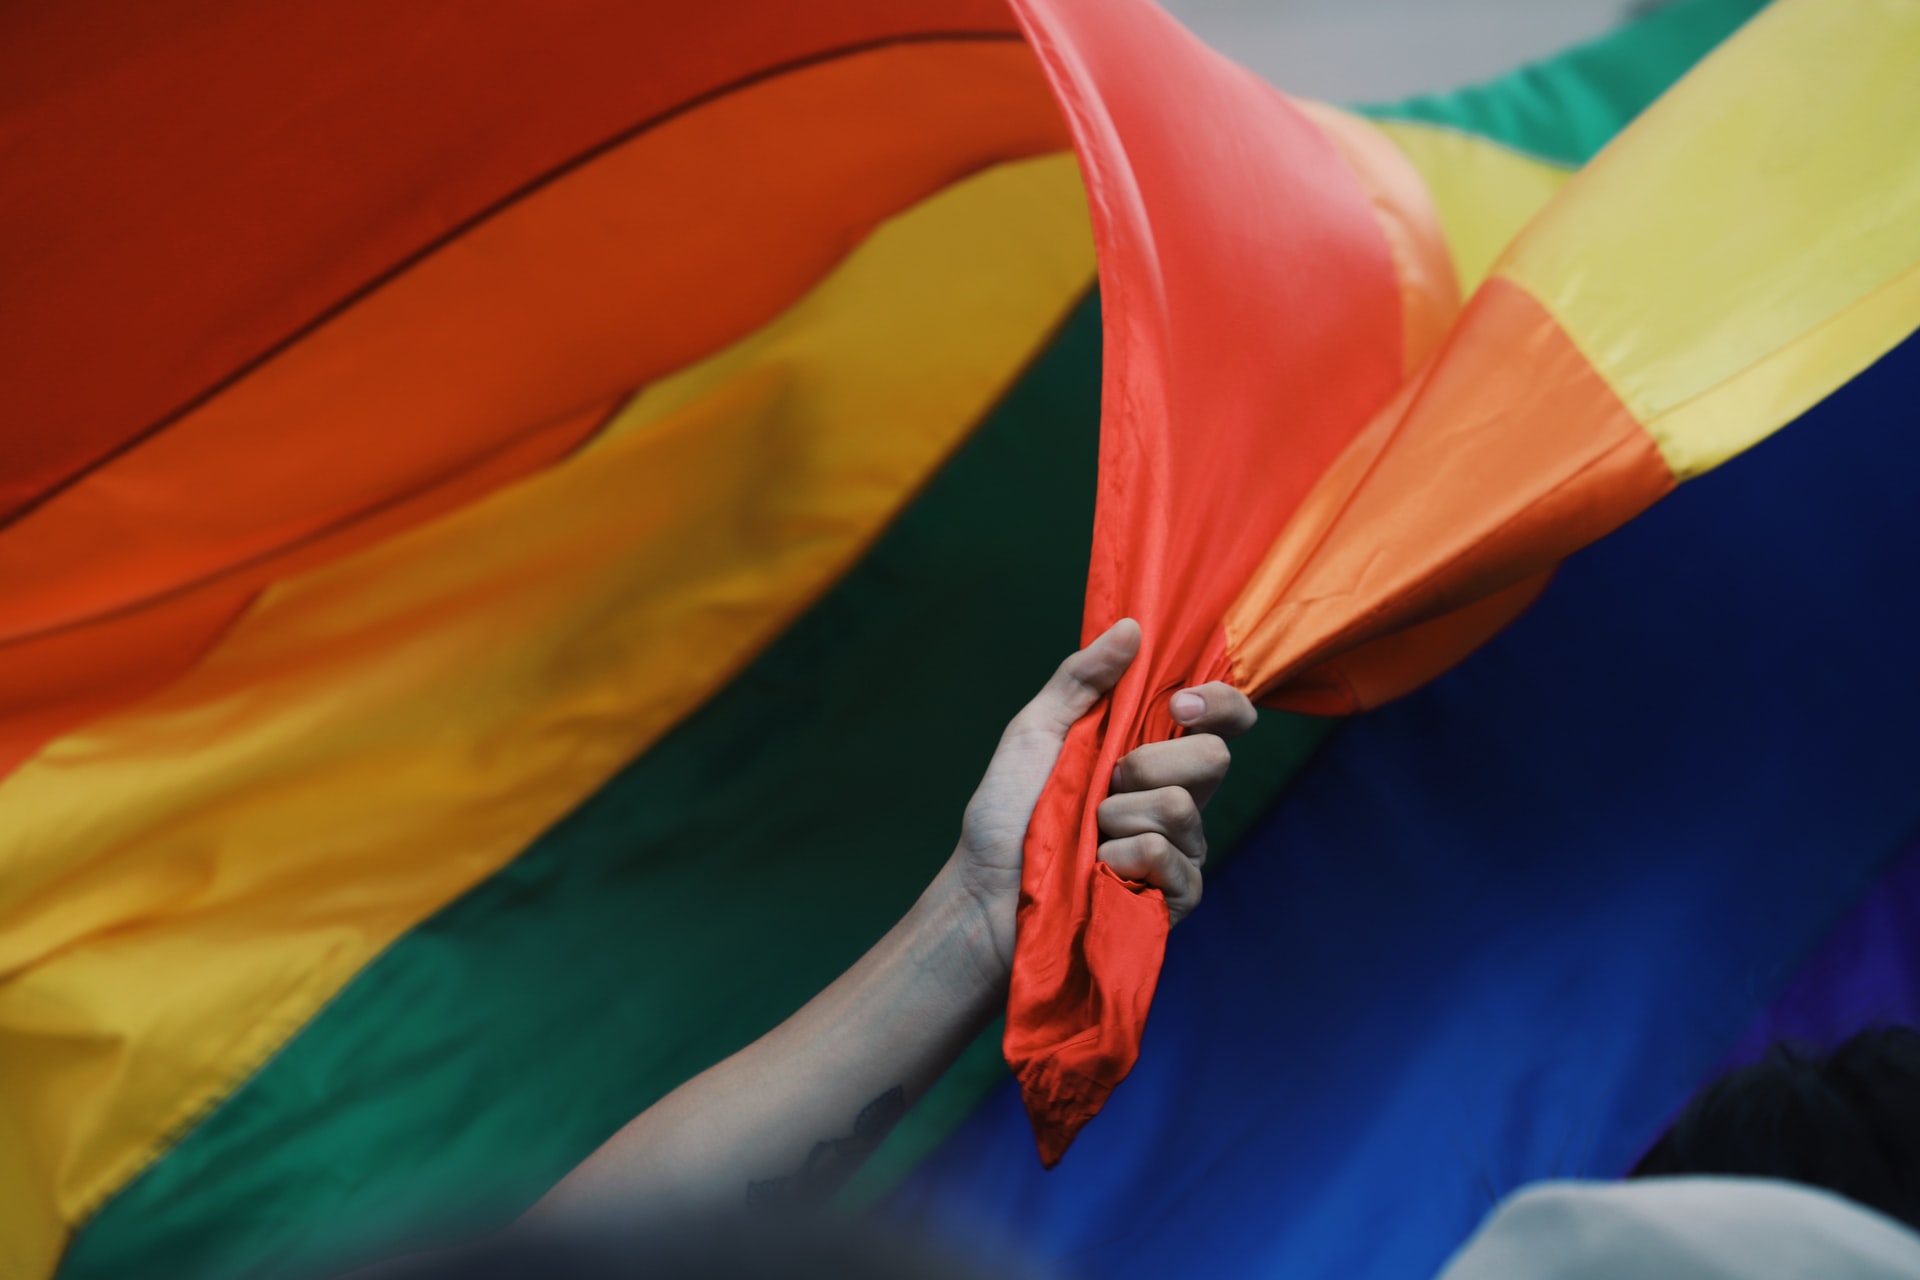 How do prisons protect the rights of LGBTQ+ prisoners?